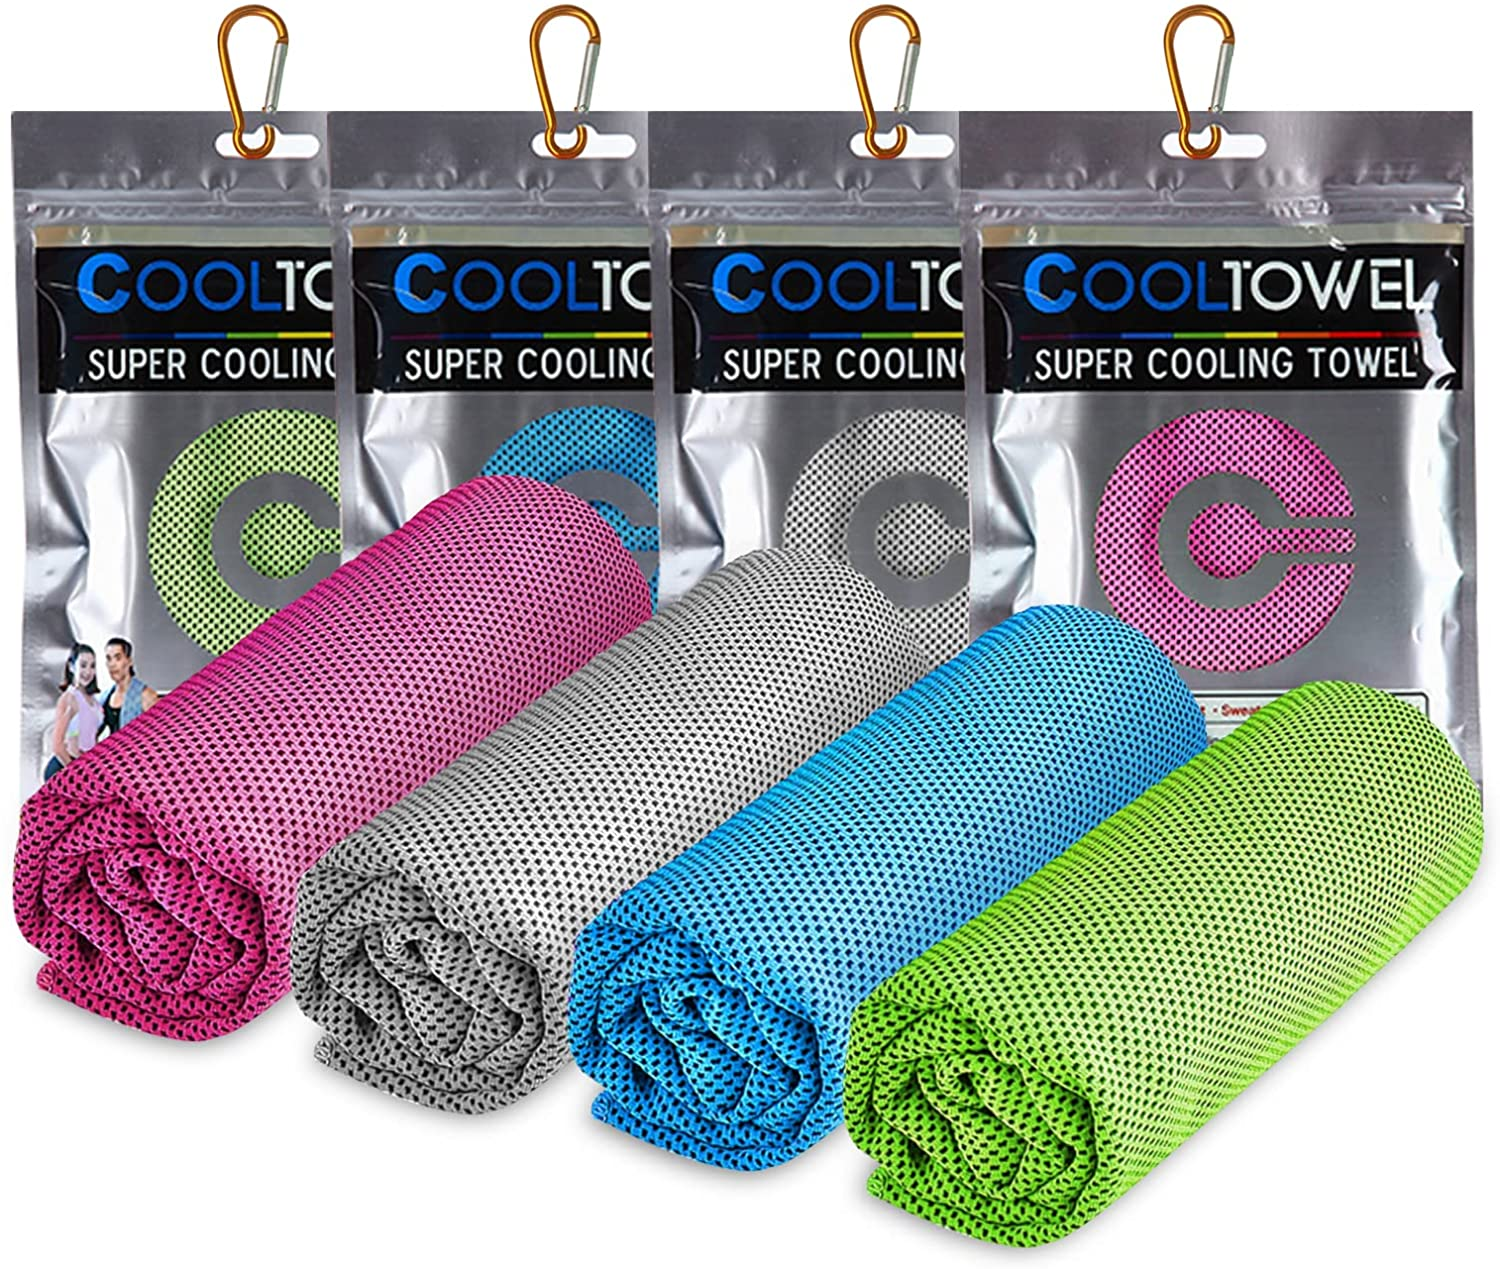 Cooling Towel (40"X12") Microfiber Cool Towel for Neck, Soft Breathable Workout Towels for Gym, Running, Yoga and More Activities